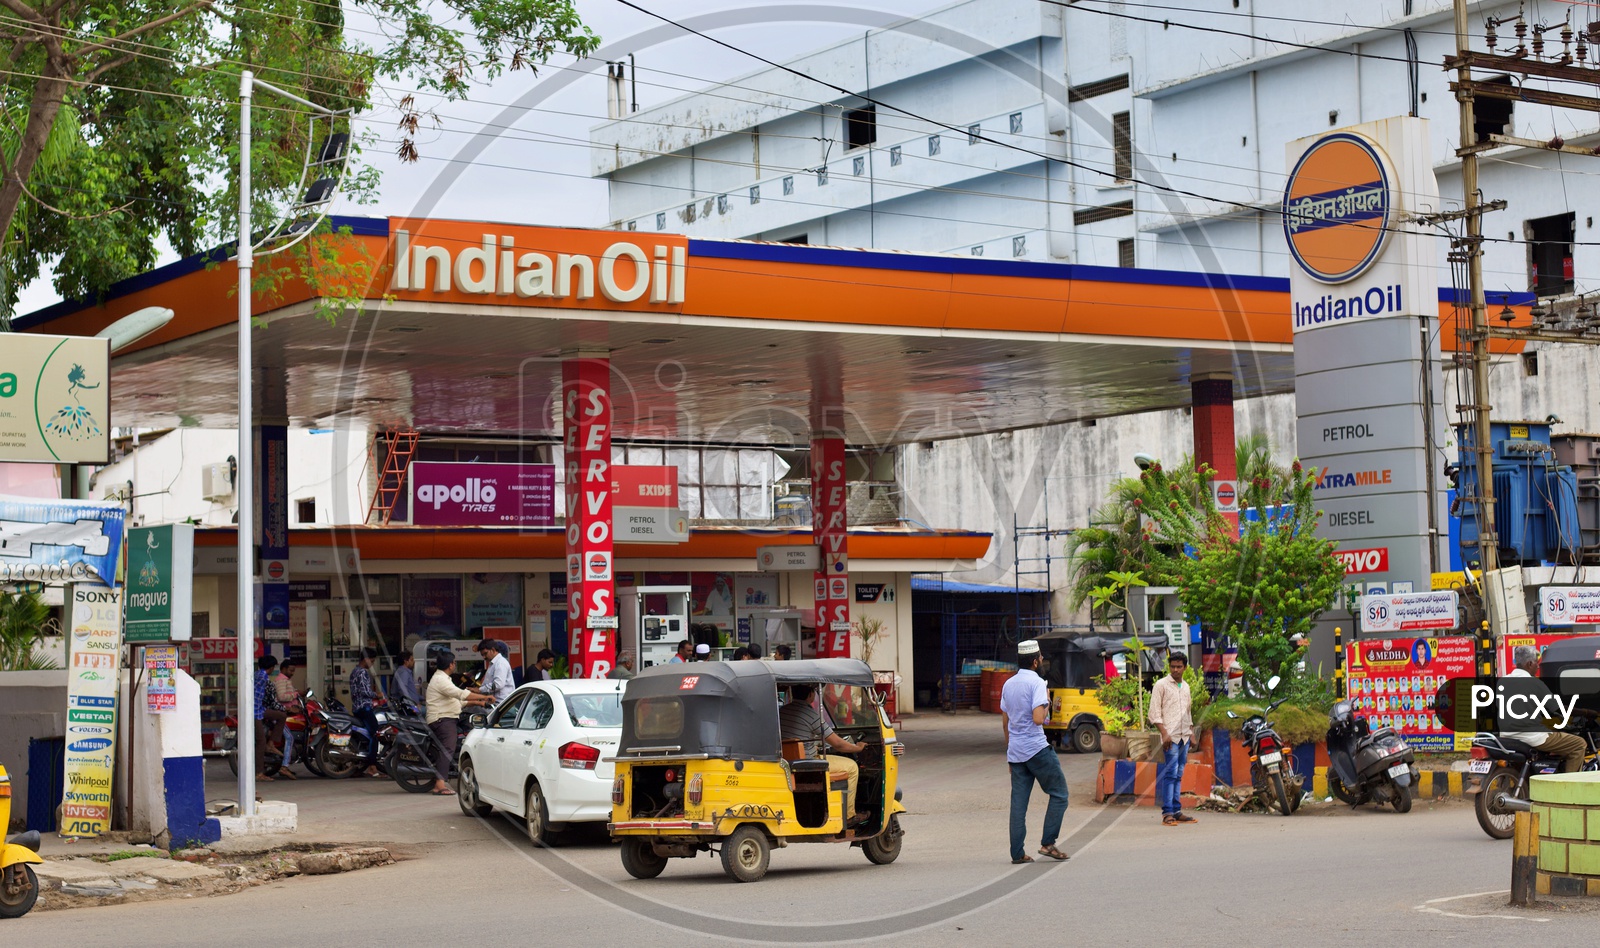 An Indian oil gas station.